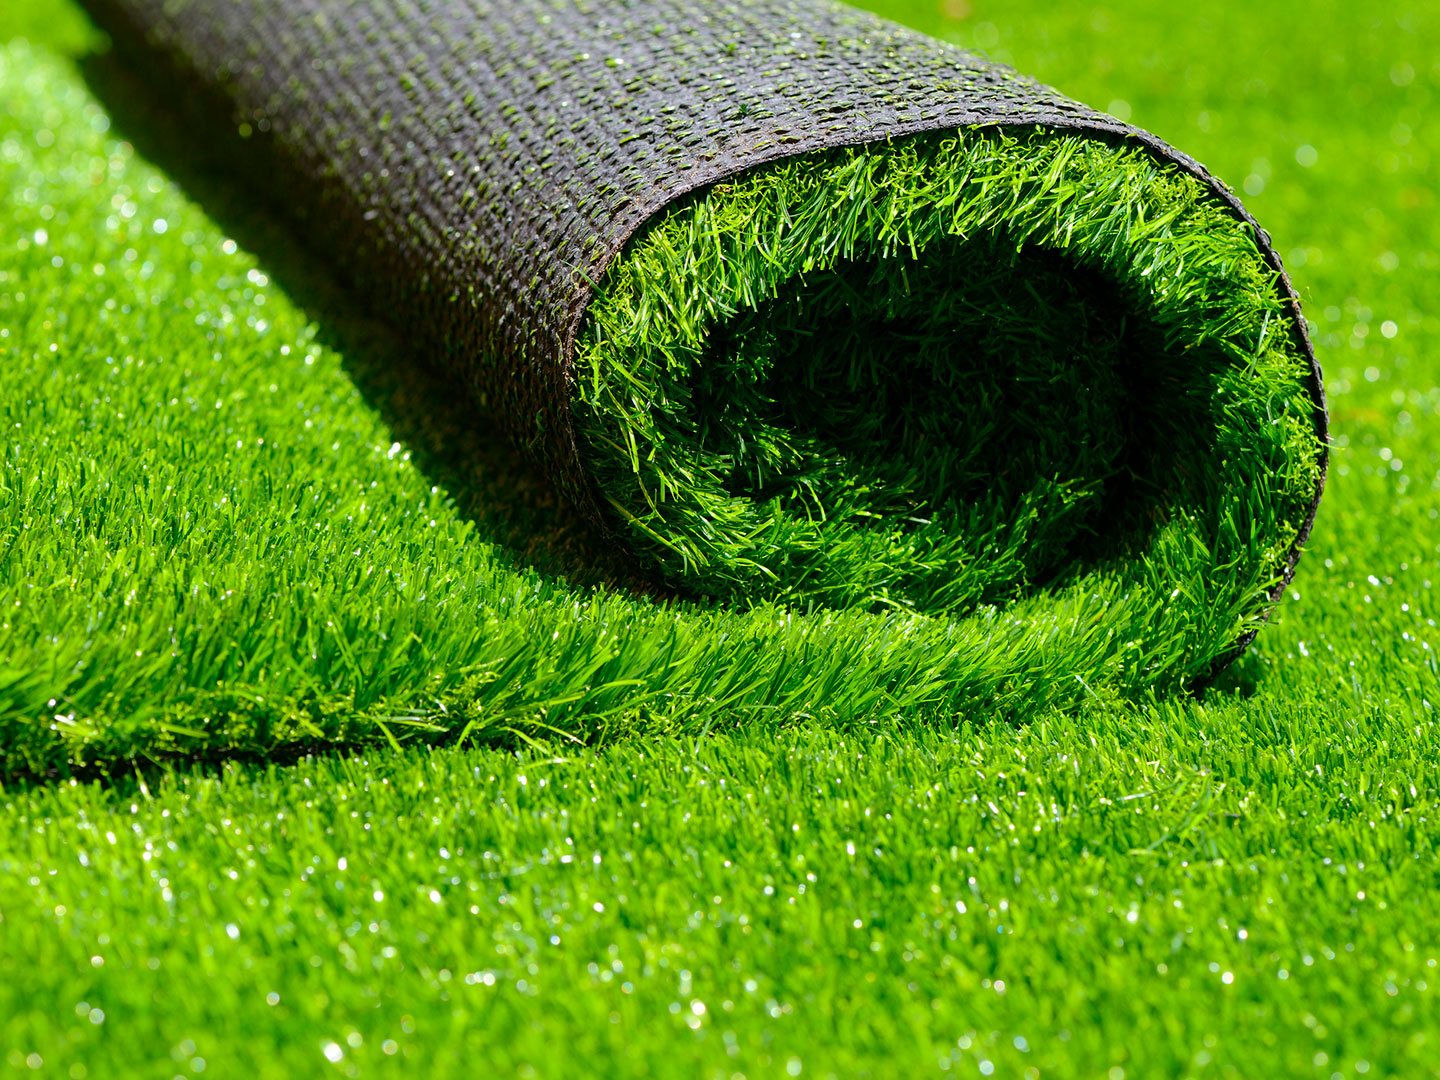 Why Does My Neighbour’s Artificial Grass Look Greener Than Mine?